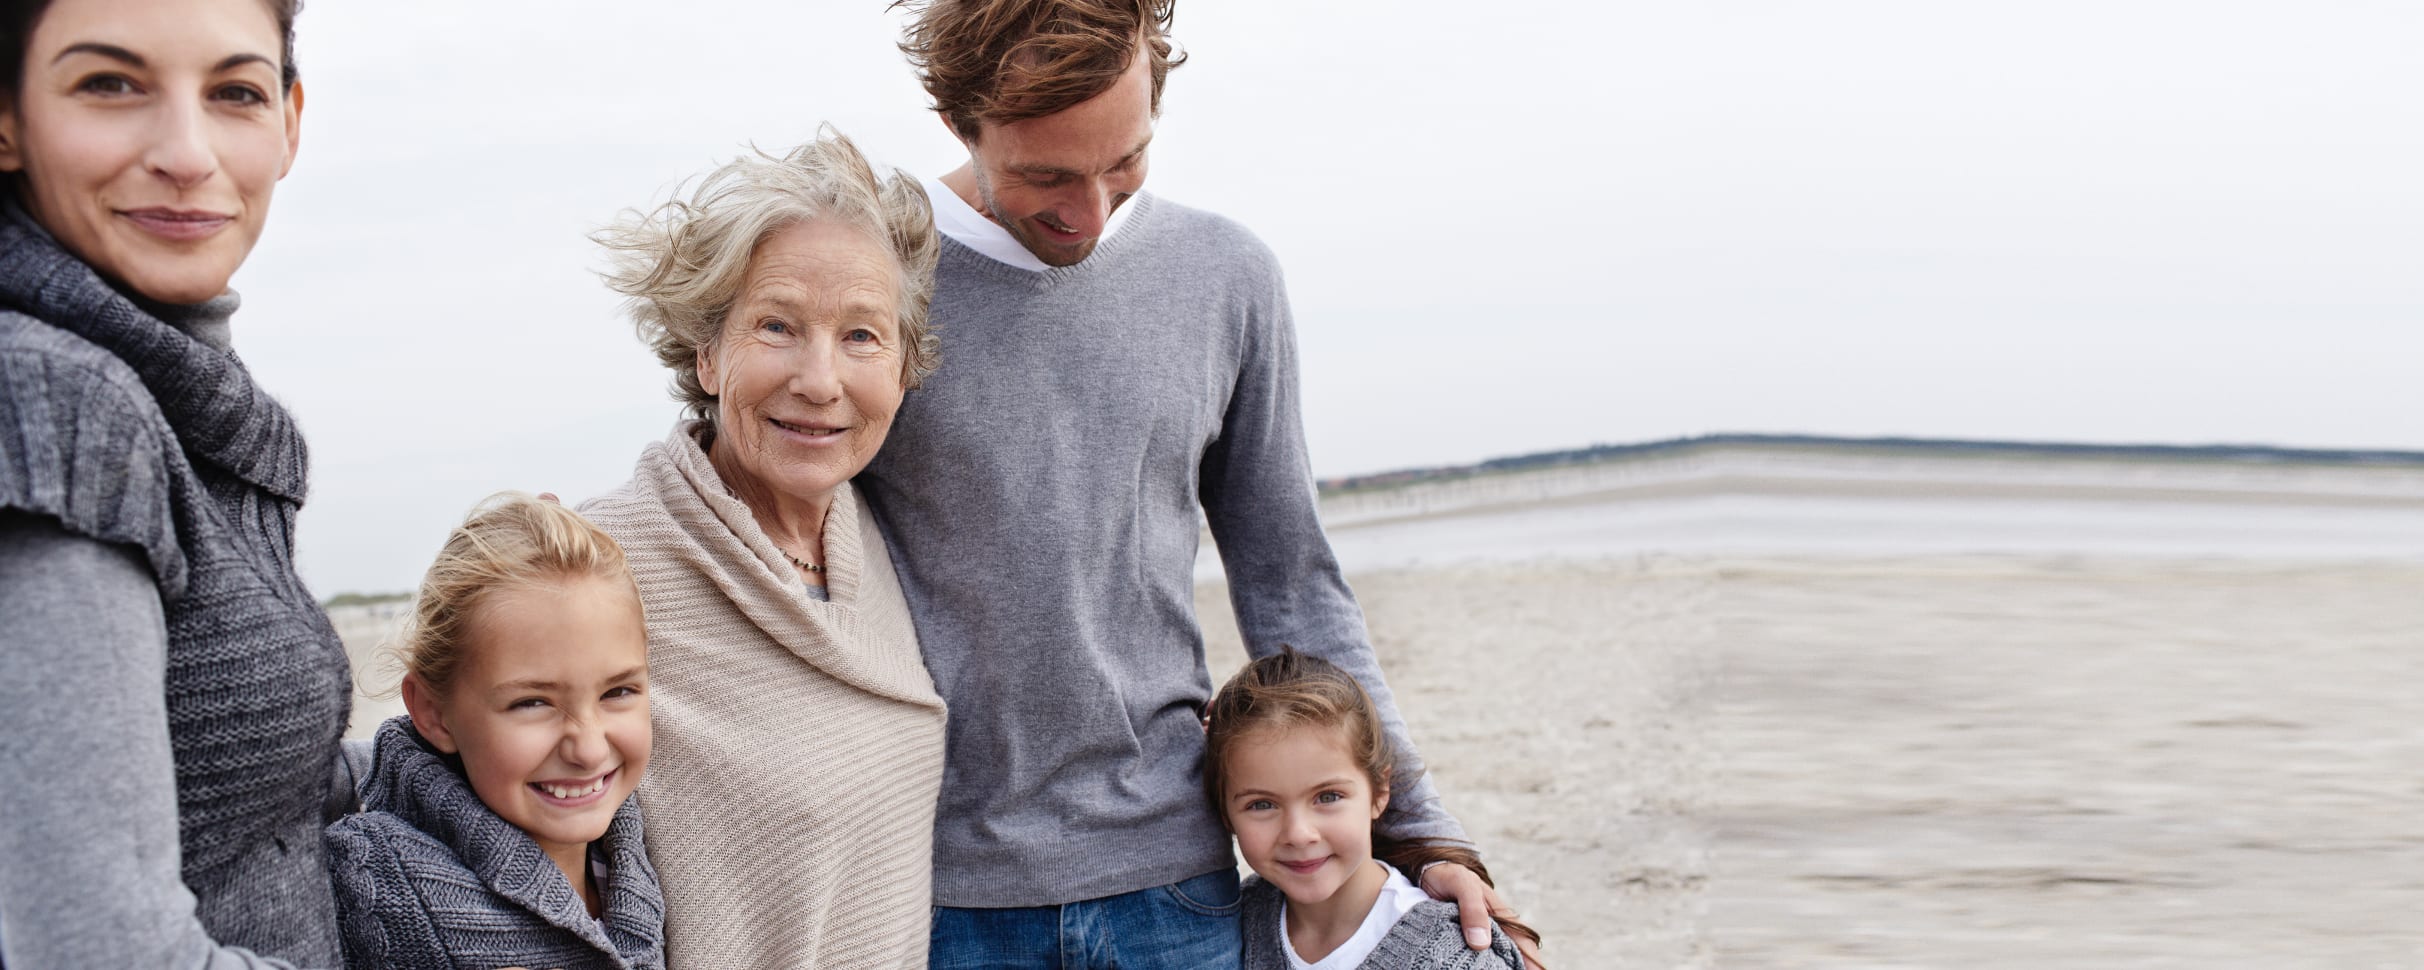 A grandmother at the beach with her children and grandchildren, all smiling at the camera.